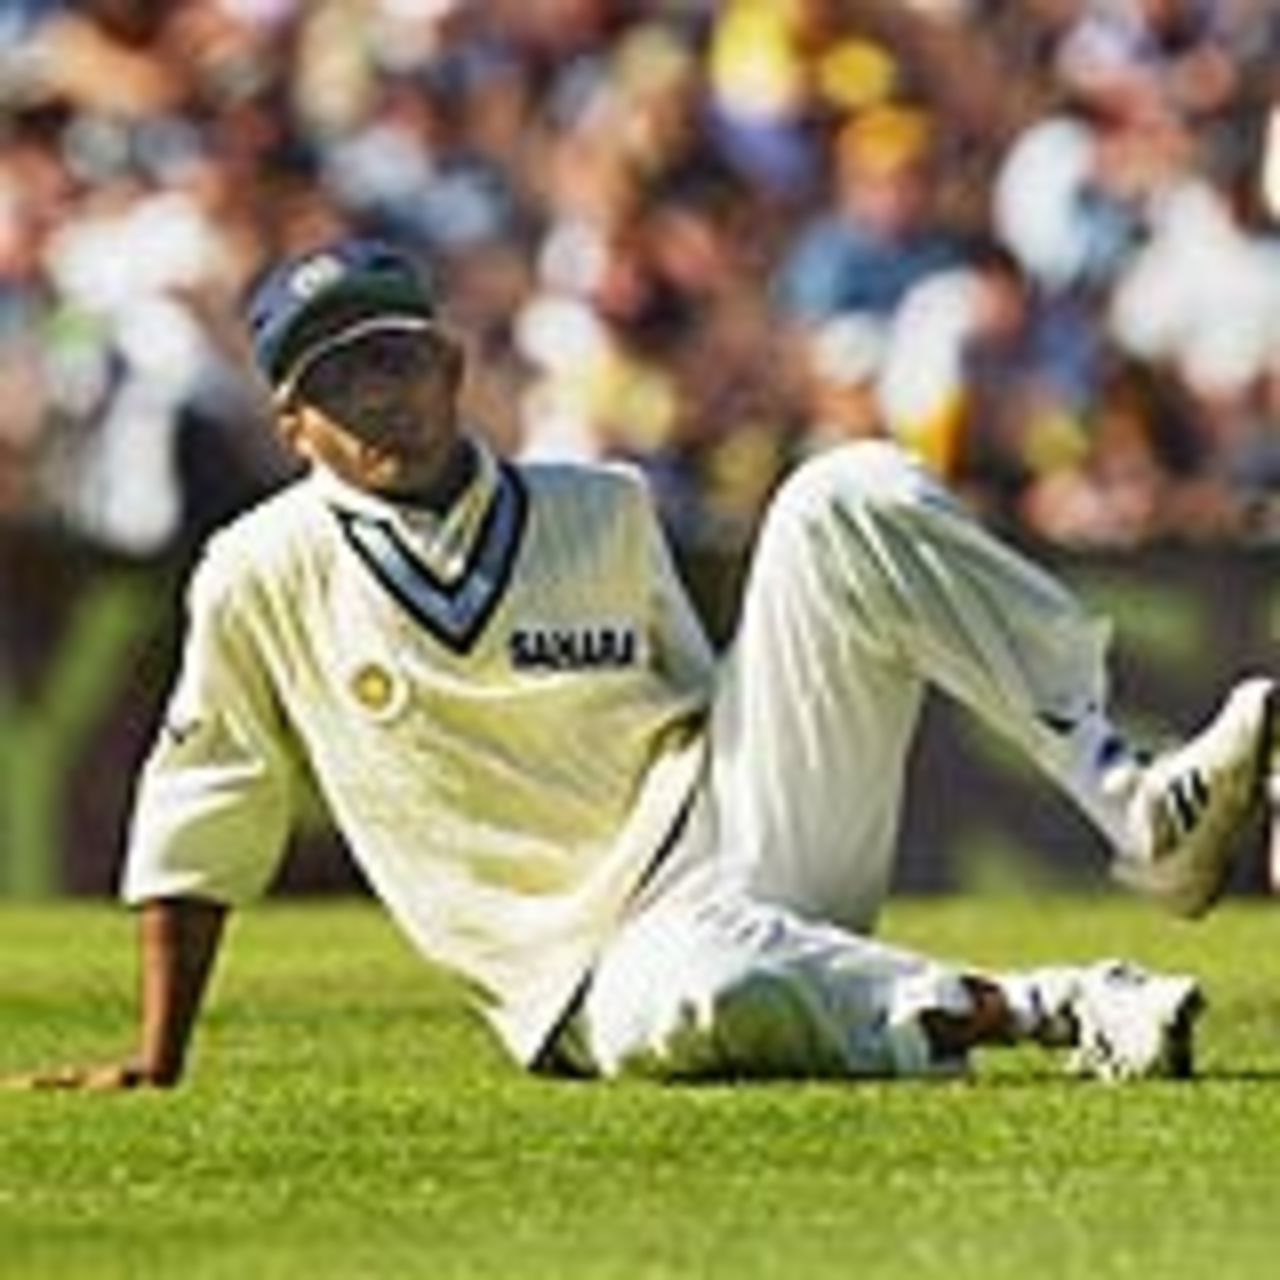 Sourav Ganguly sits despondently on the ground after a misfield, Australia v India, 3rd Test, Melbourne, 2nd day, December 27, 2003